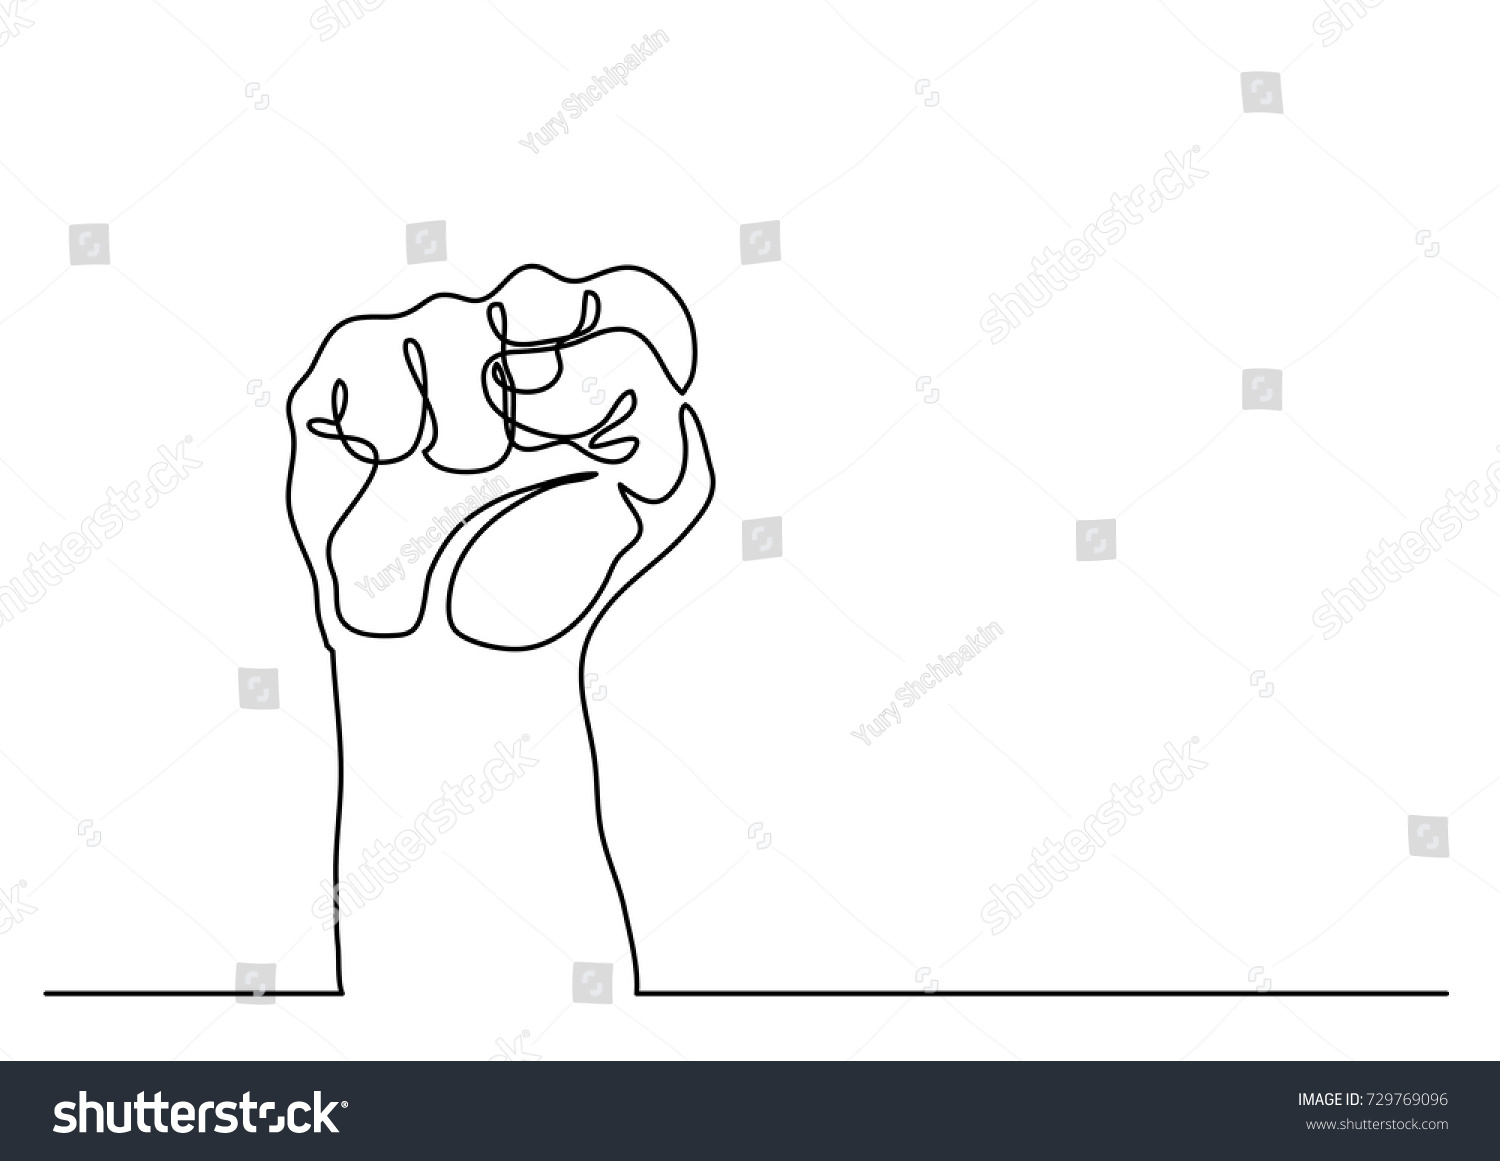 Continuous Line Drawing Fist Stock Vector (Royalty Free) 729769096 ...